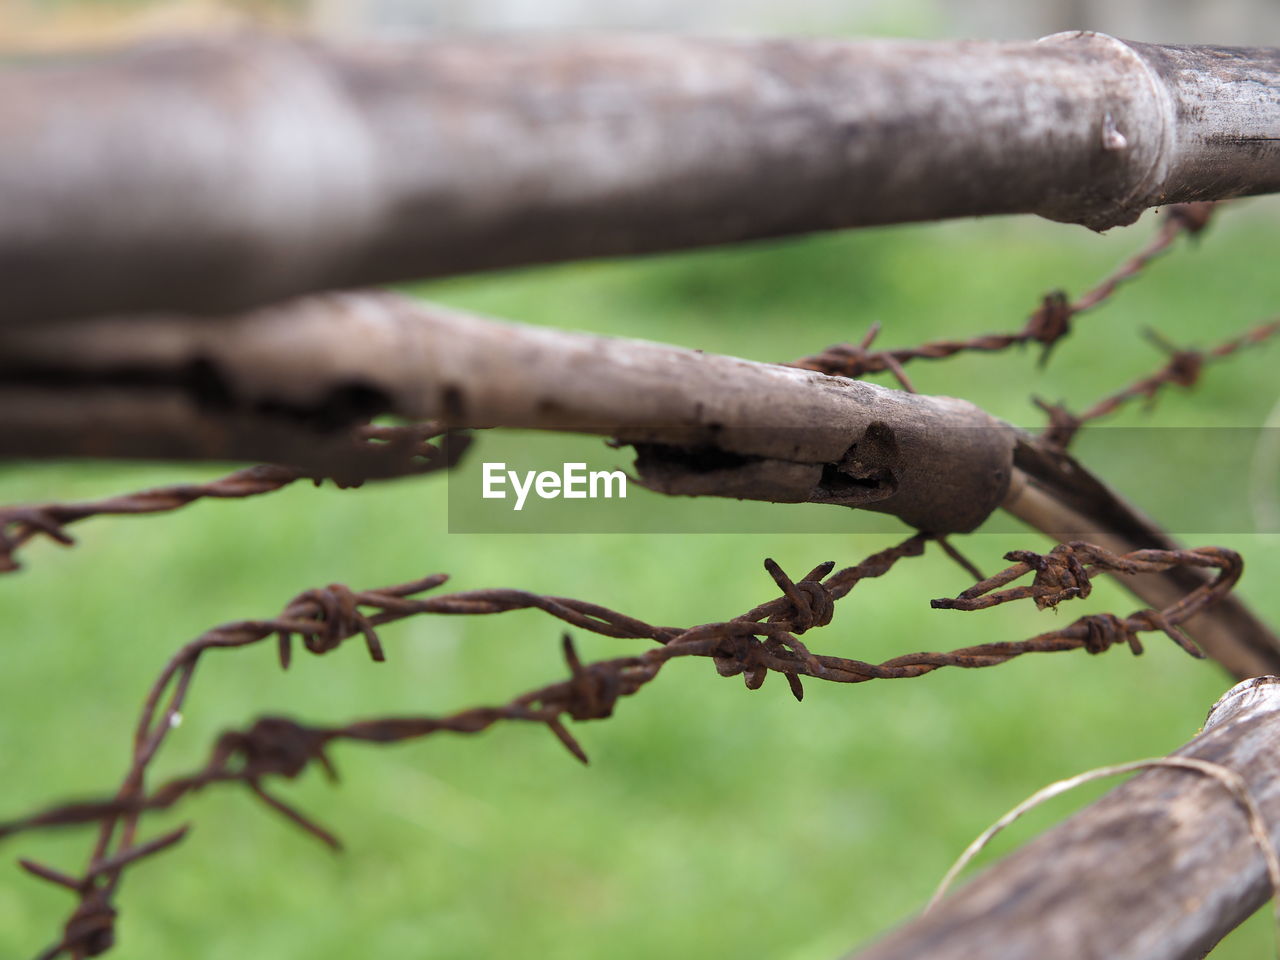 CLOSE-UP OF RUSTY BARBED WIRE ON TREE